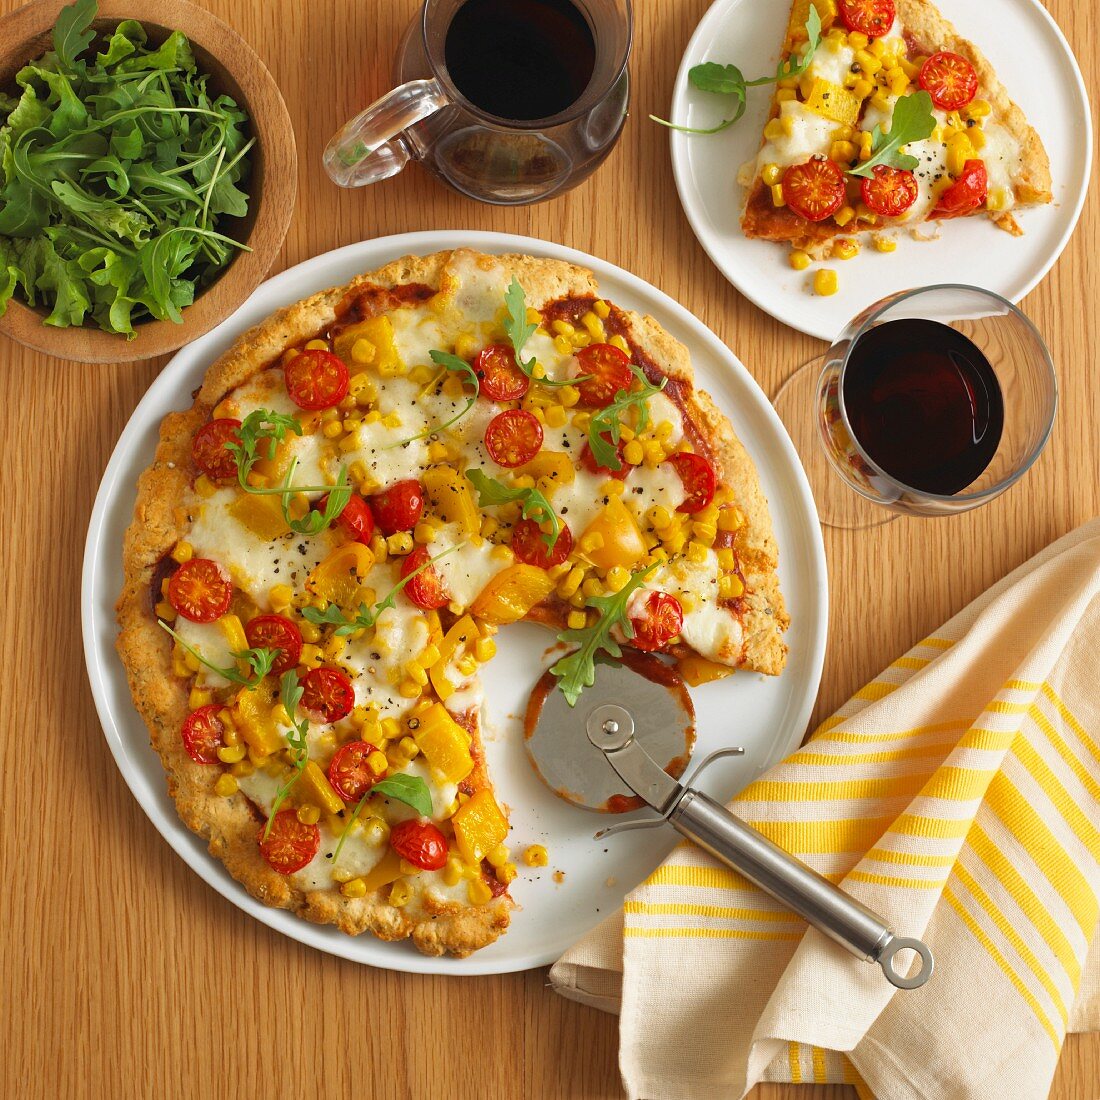 Vegetable pizza with peppers, sweetcorn and tomatoes (view from above)